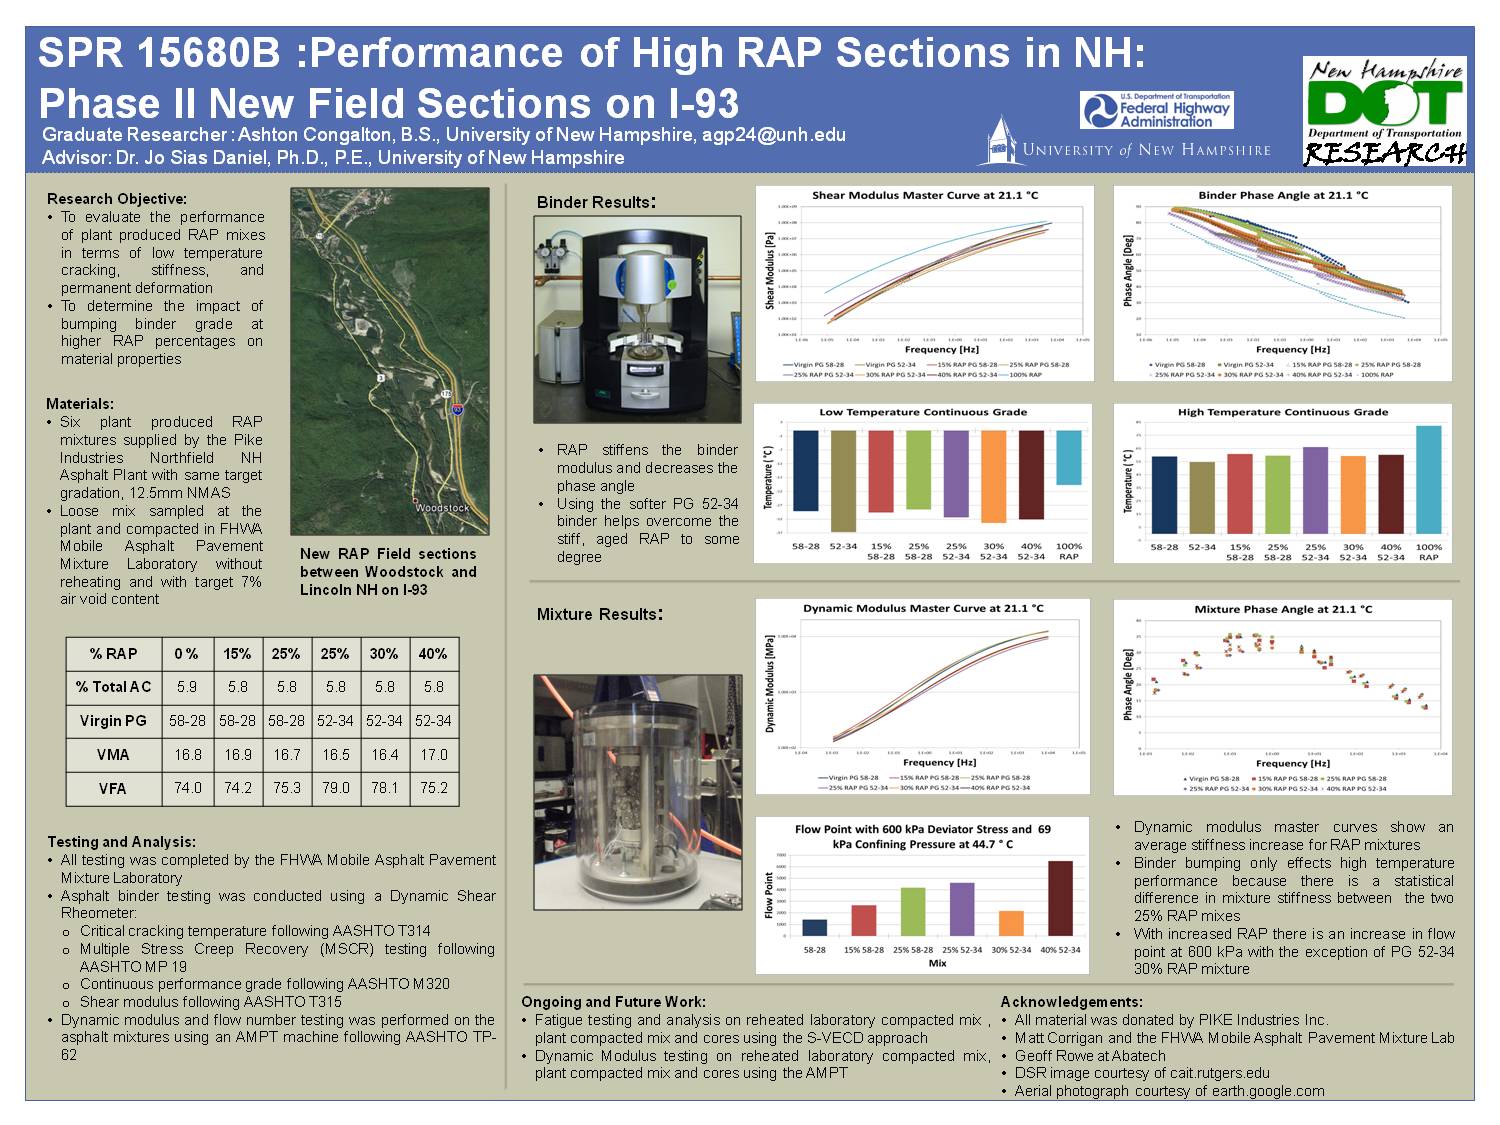 Nhdot Showcase Spr 15680b I93 Field Sections Poster by agp24